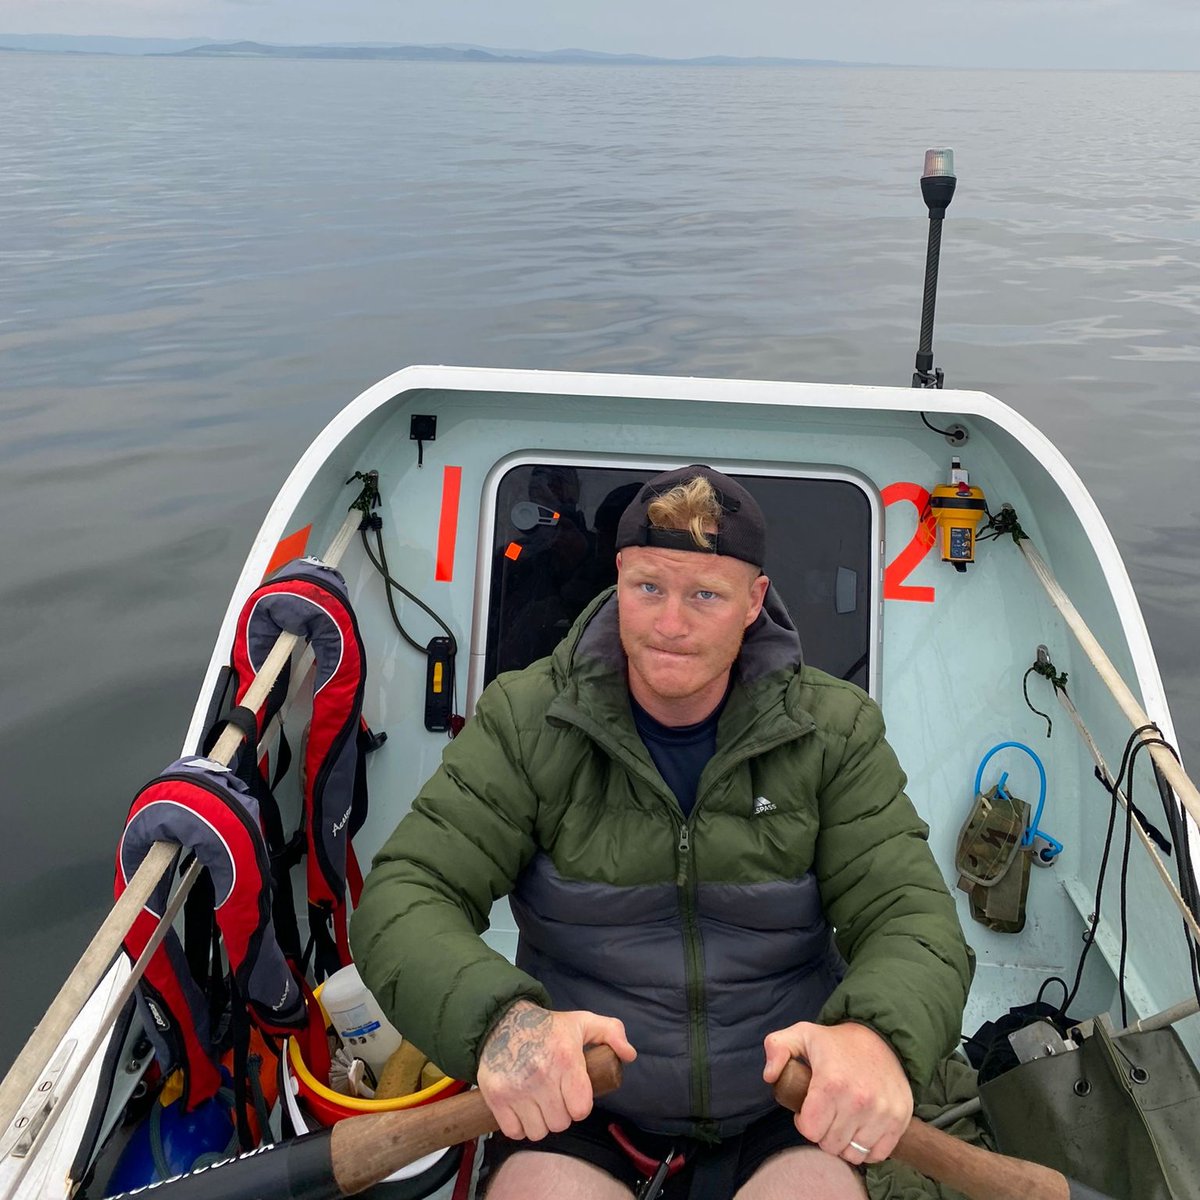 #AtlanticGuardsmen

The team have been putting in the hours on the boat and are looking great!!! They are rowing for soldiers, former soldiers and their families!! 

If you would like to donate please follow the link below:

ecs.page.link/FqfVt